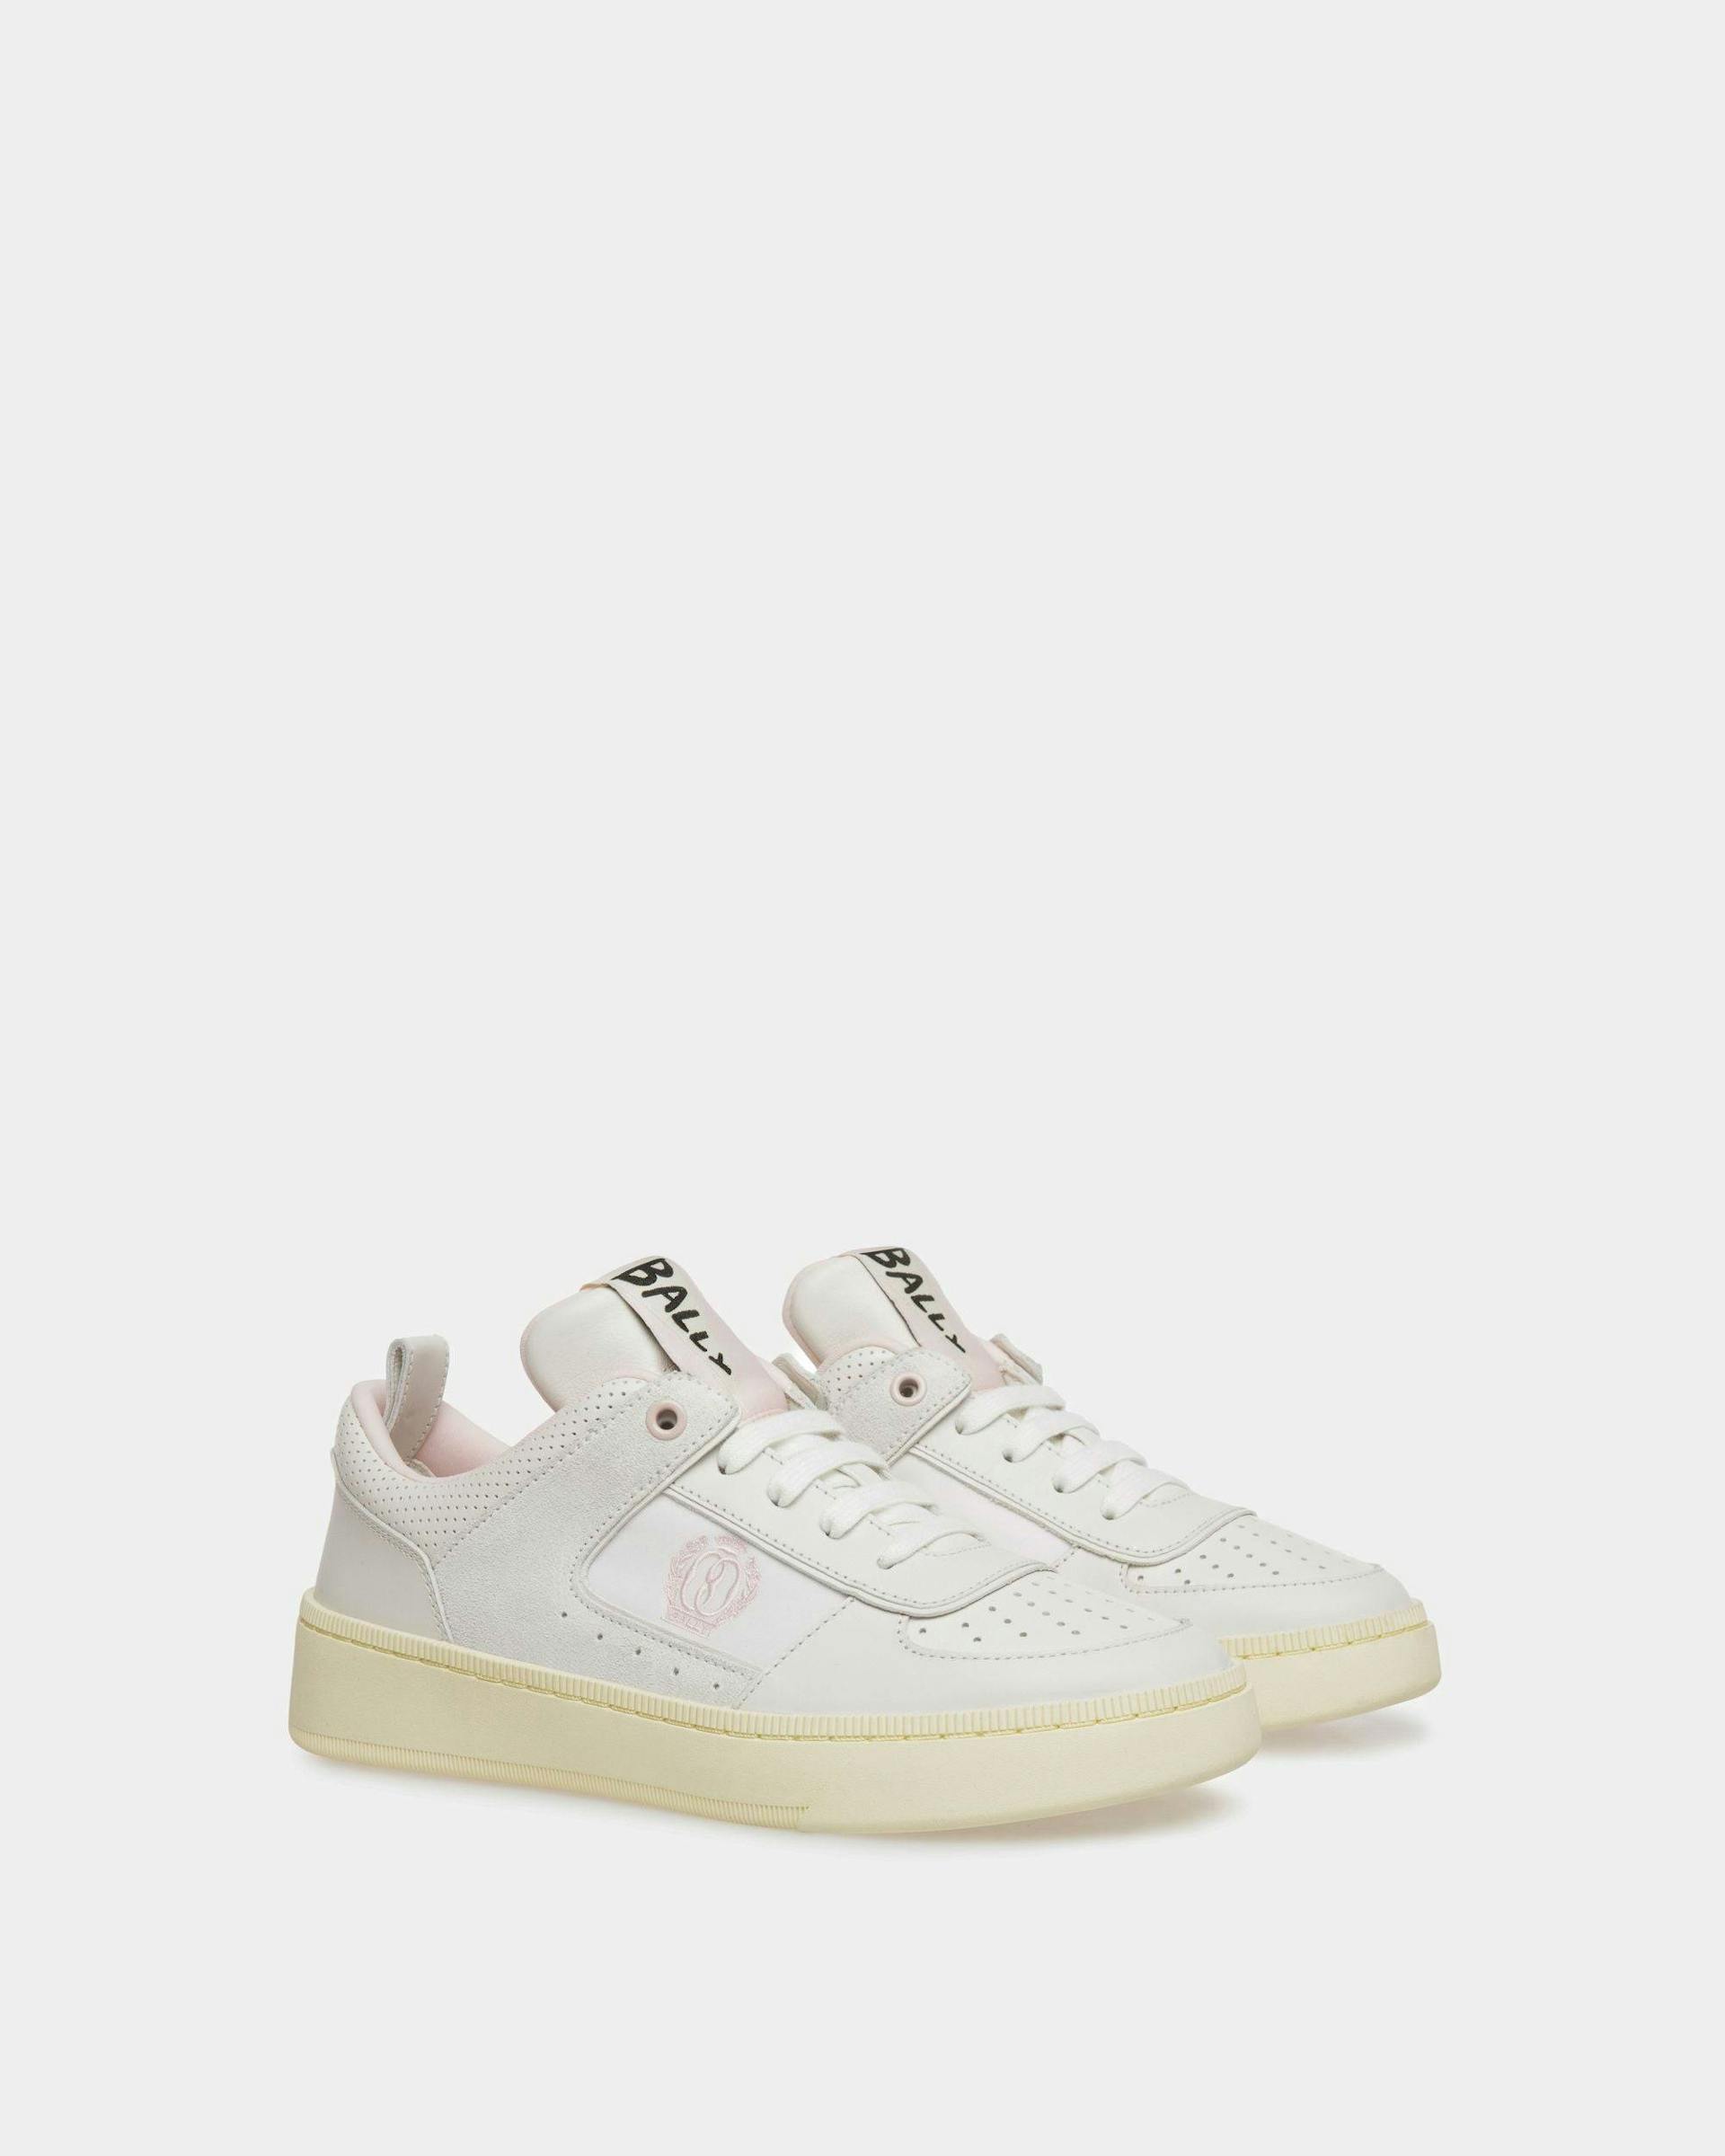 Raise Sneakers In White And Rosa Leather - Women's - Bally - 02